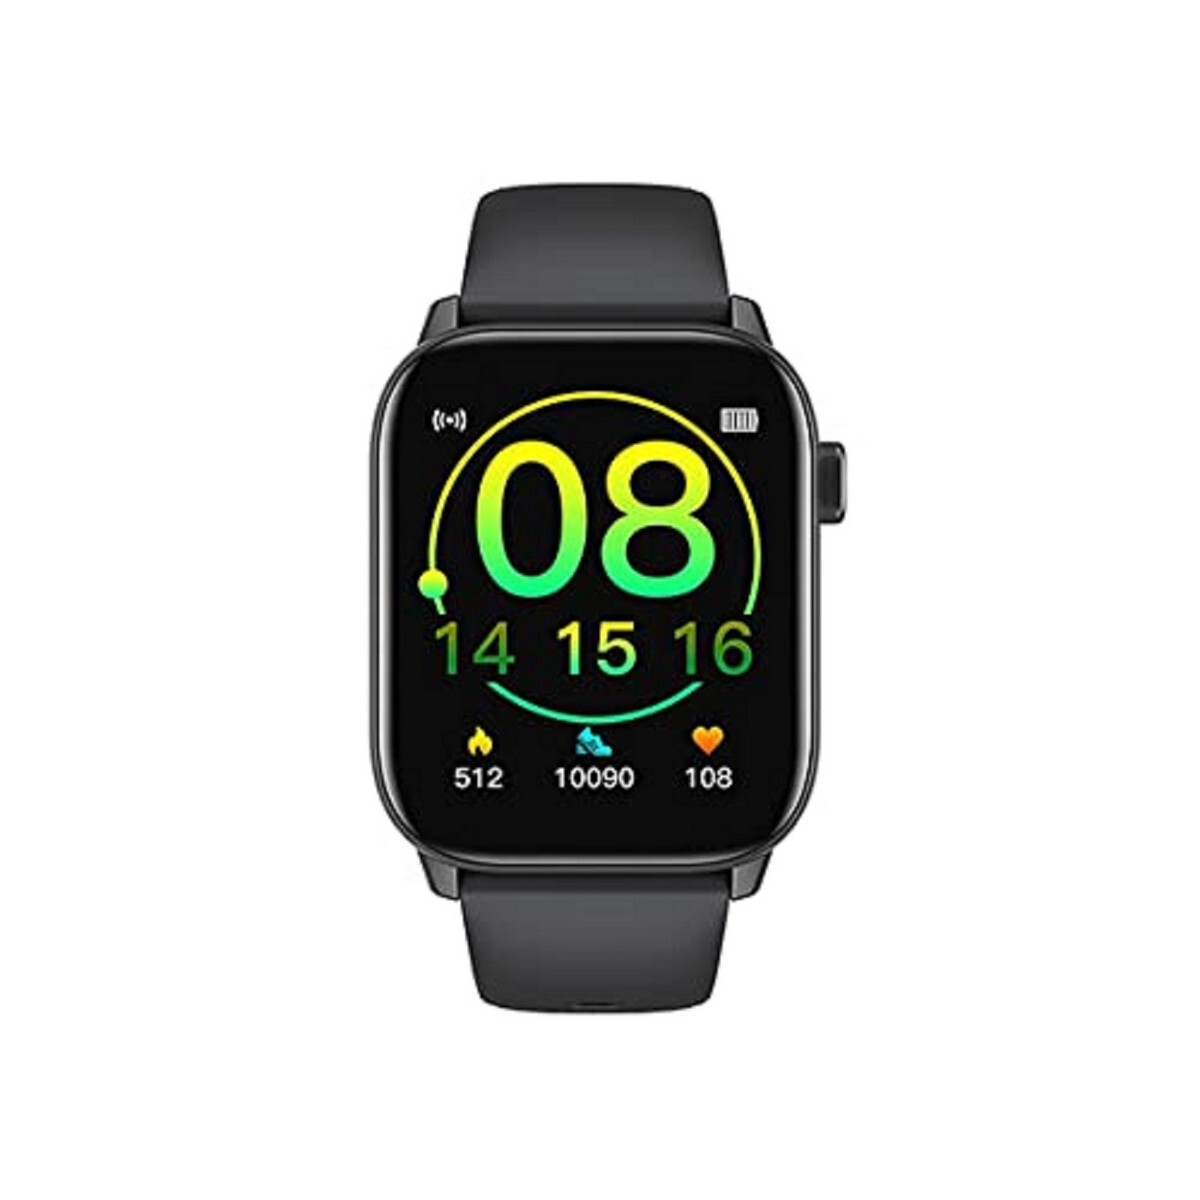 Hoco Smart watch Y3,8 sports modes, heart rate and sleep monitoring, sedentary reminder, 13 languages, multiple dials to choose